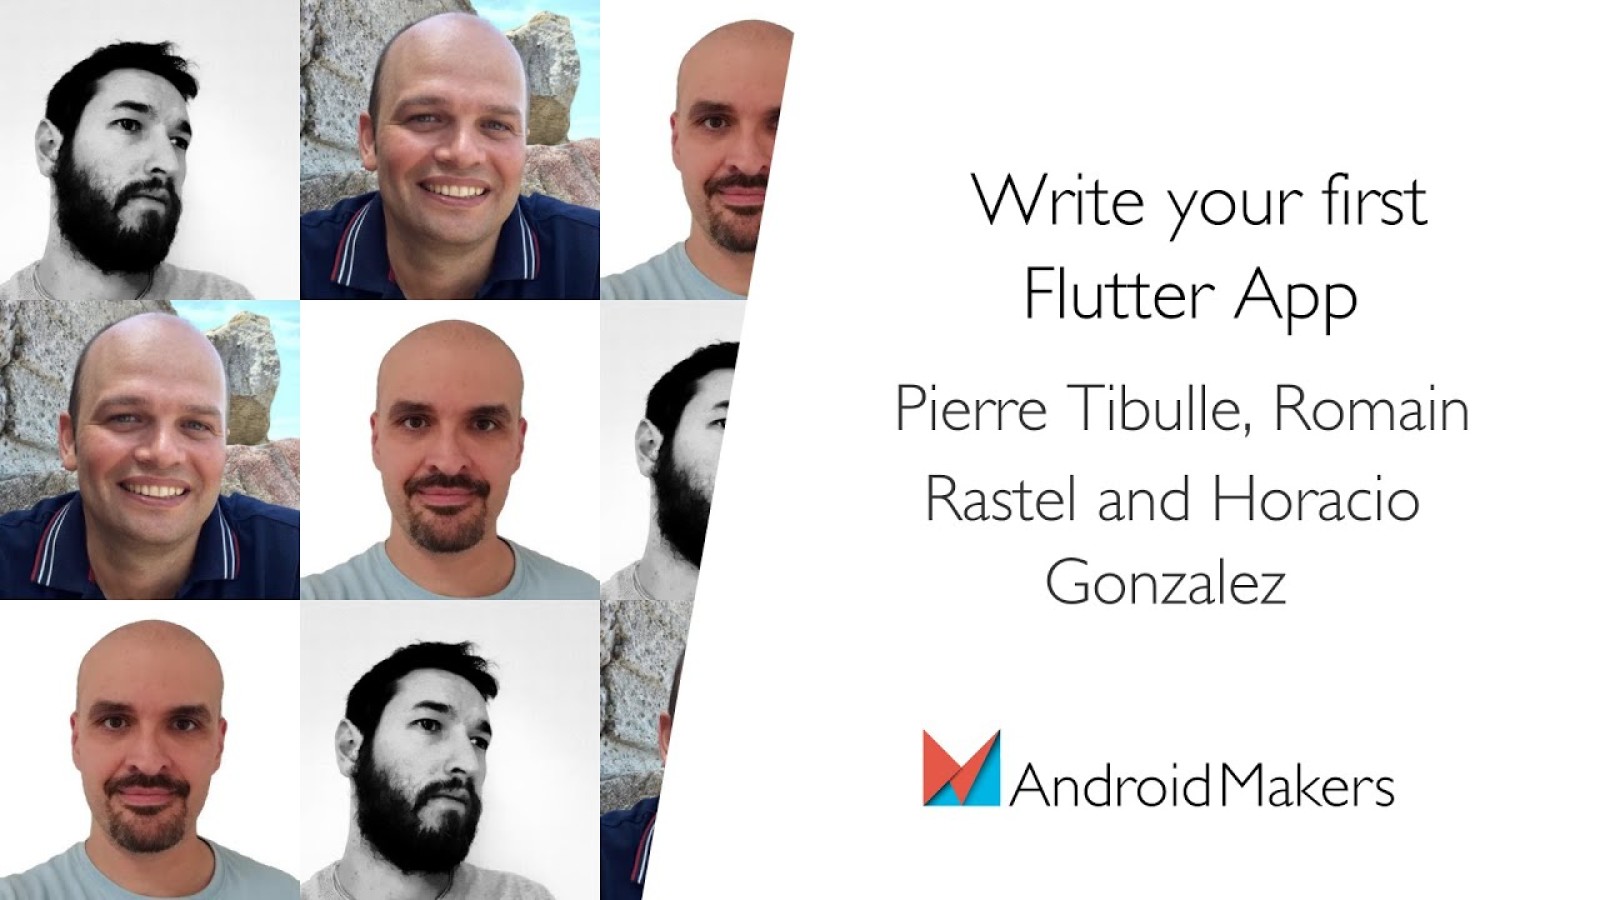 Two hours to write your first Flutter App